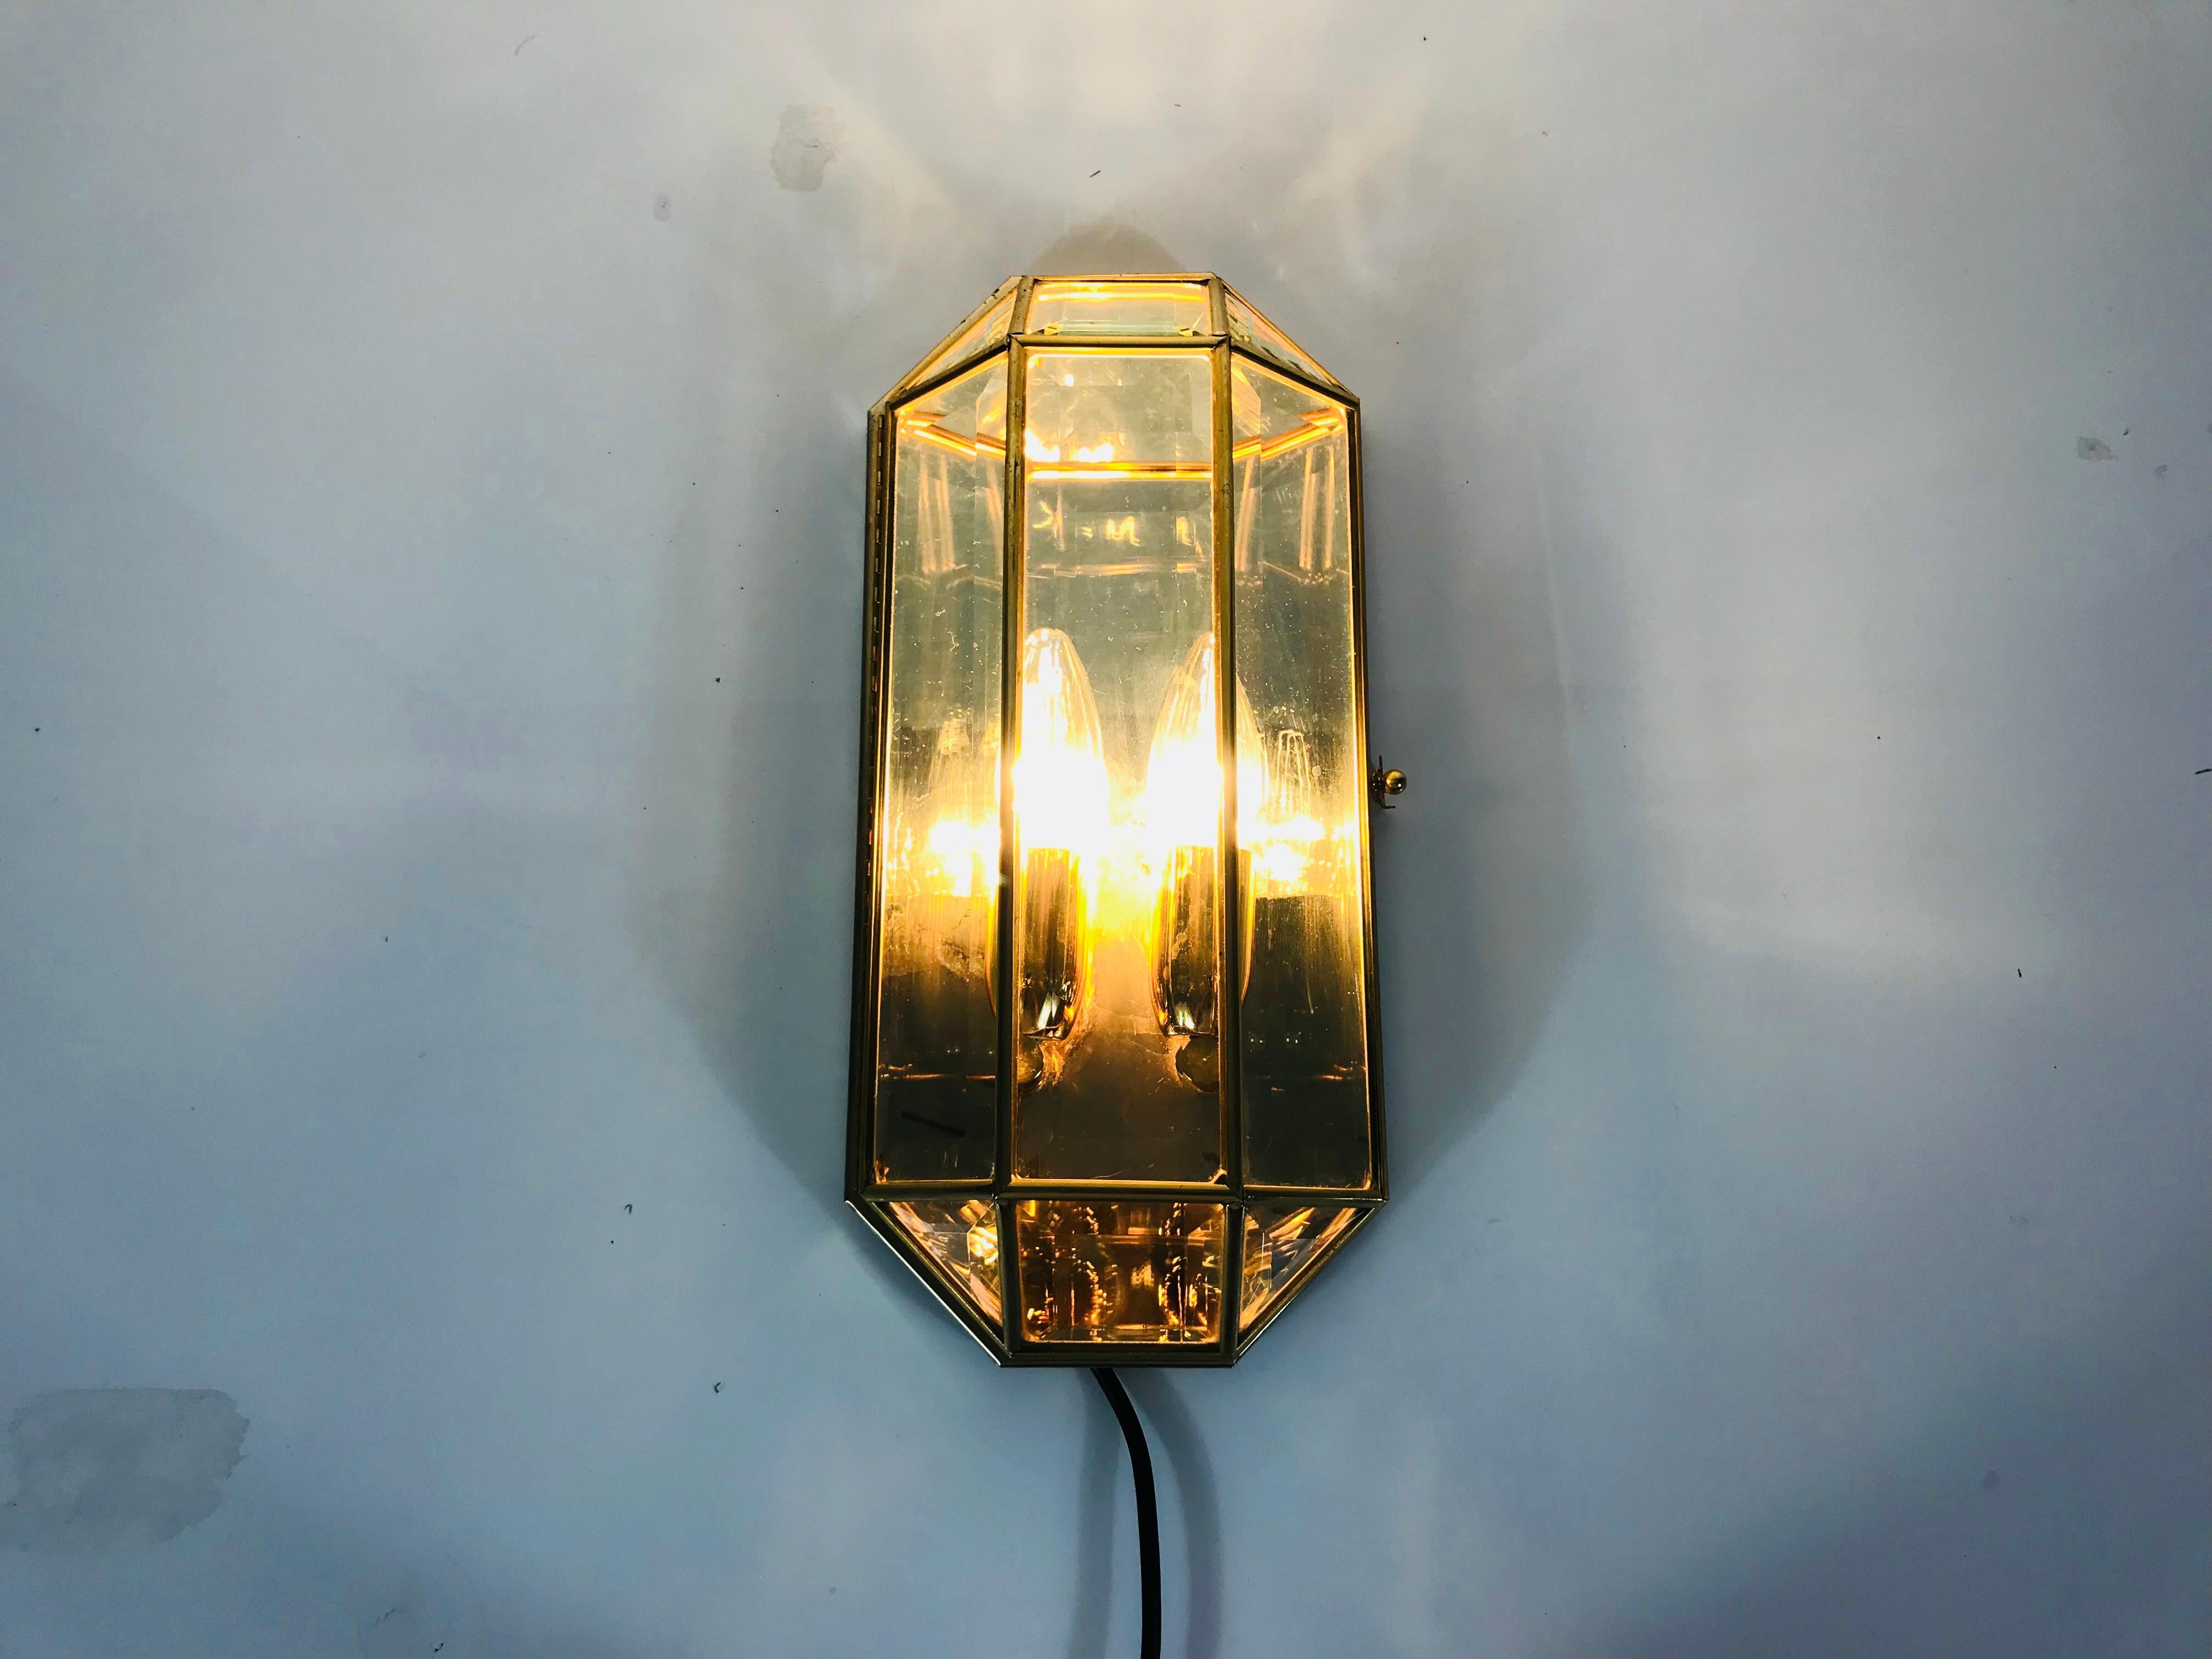 A midcentury wall lamp made in Italy in the 1960s. The lamp shade has an octagonal shape and is made of glass and golden metal. The back is aluminium.

The light has two sockets which require an E14 light bulb.